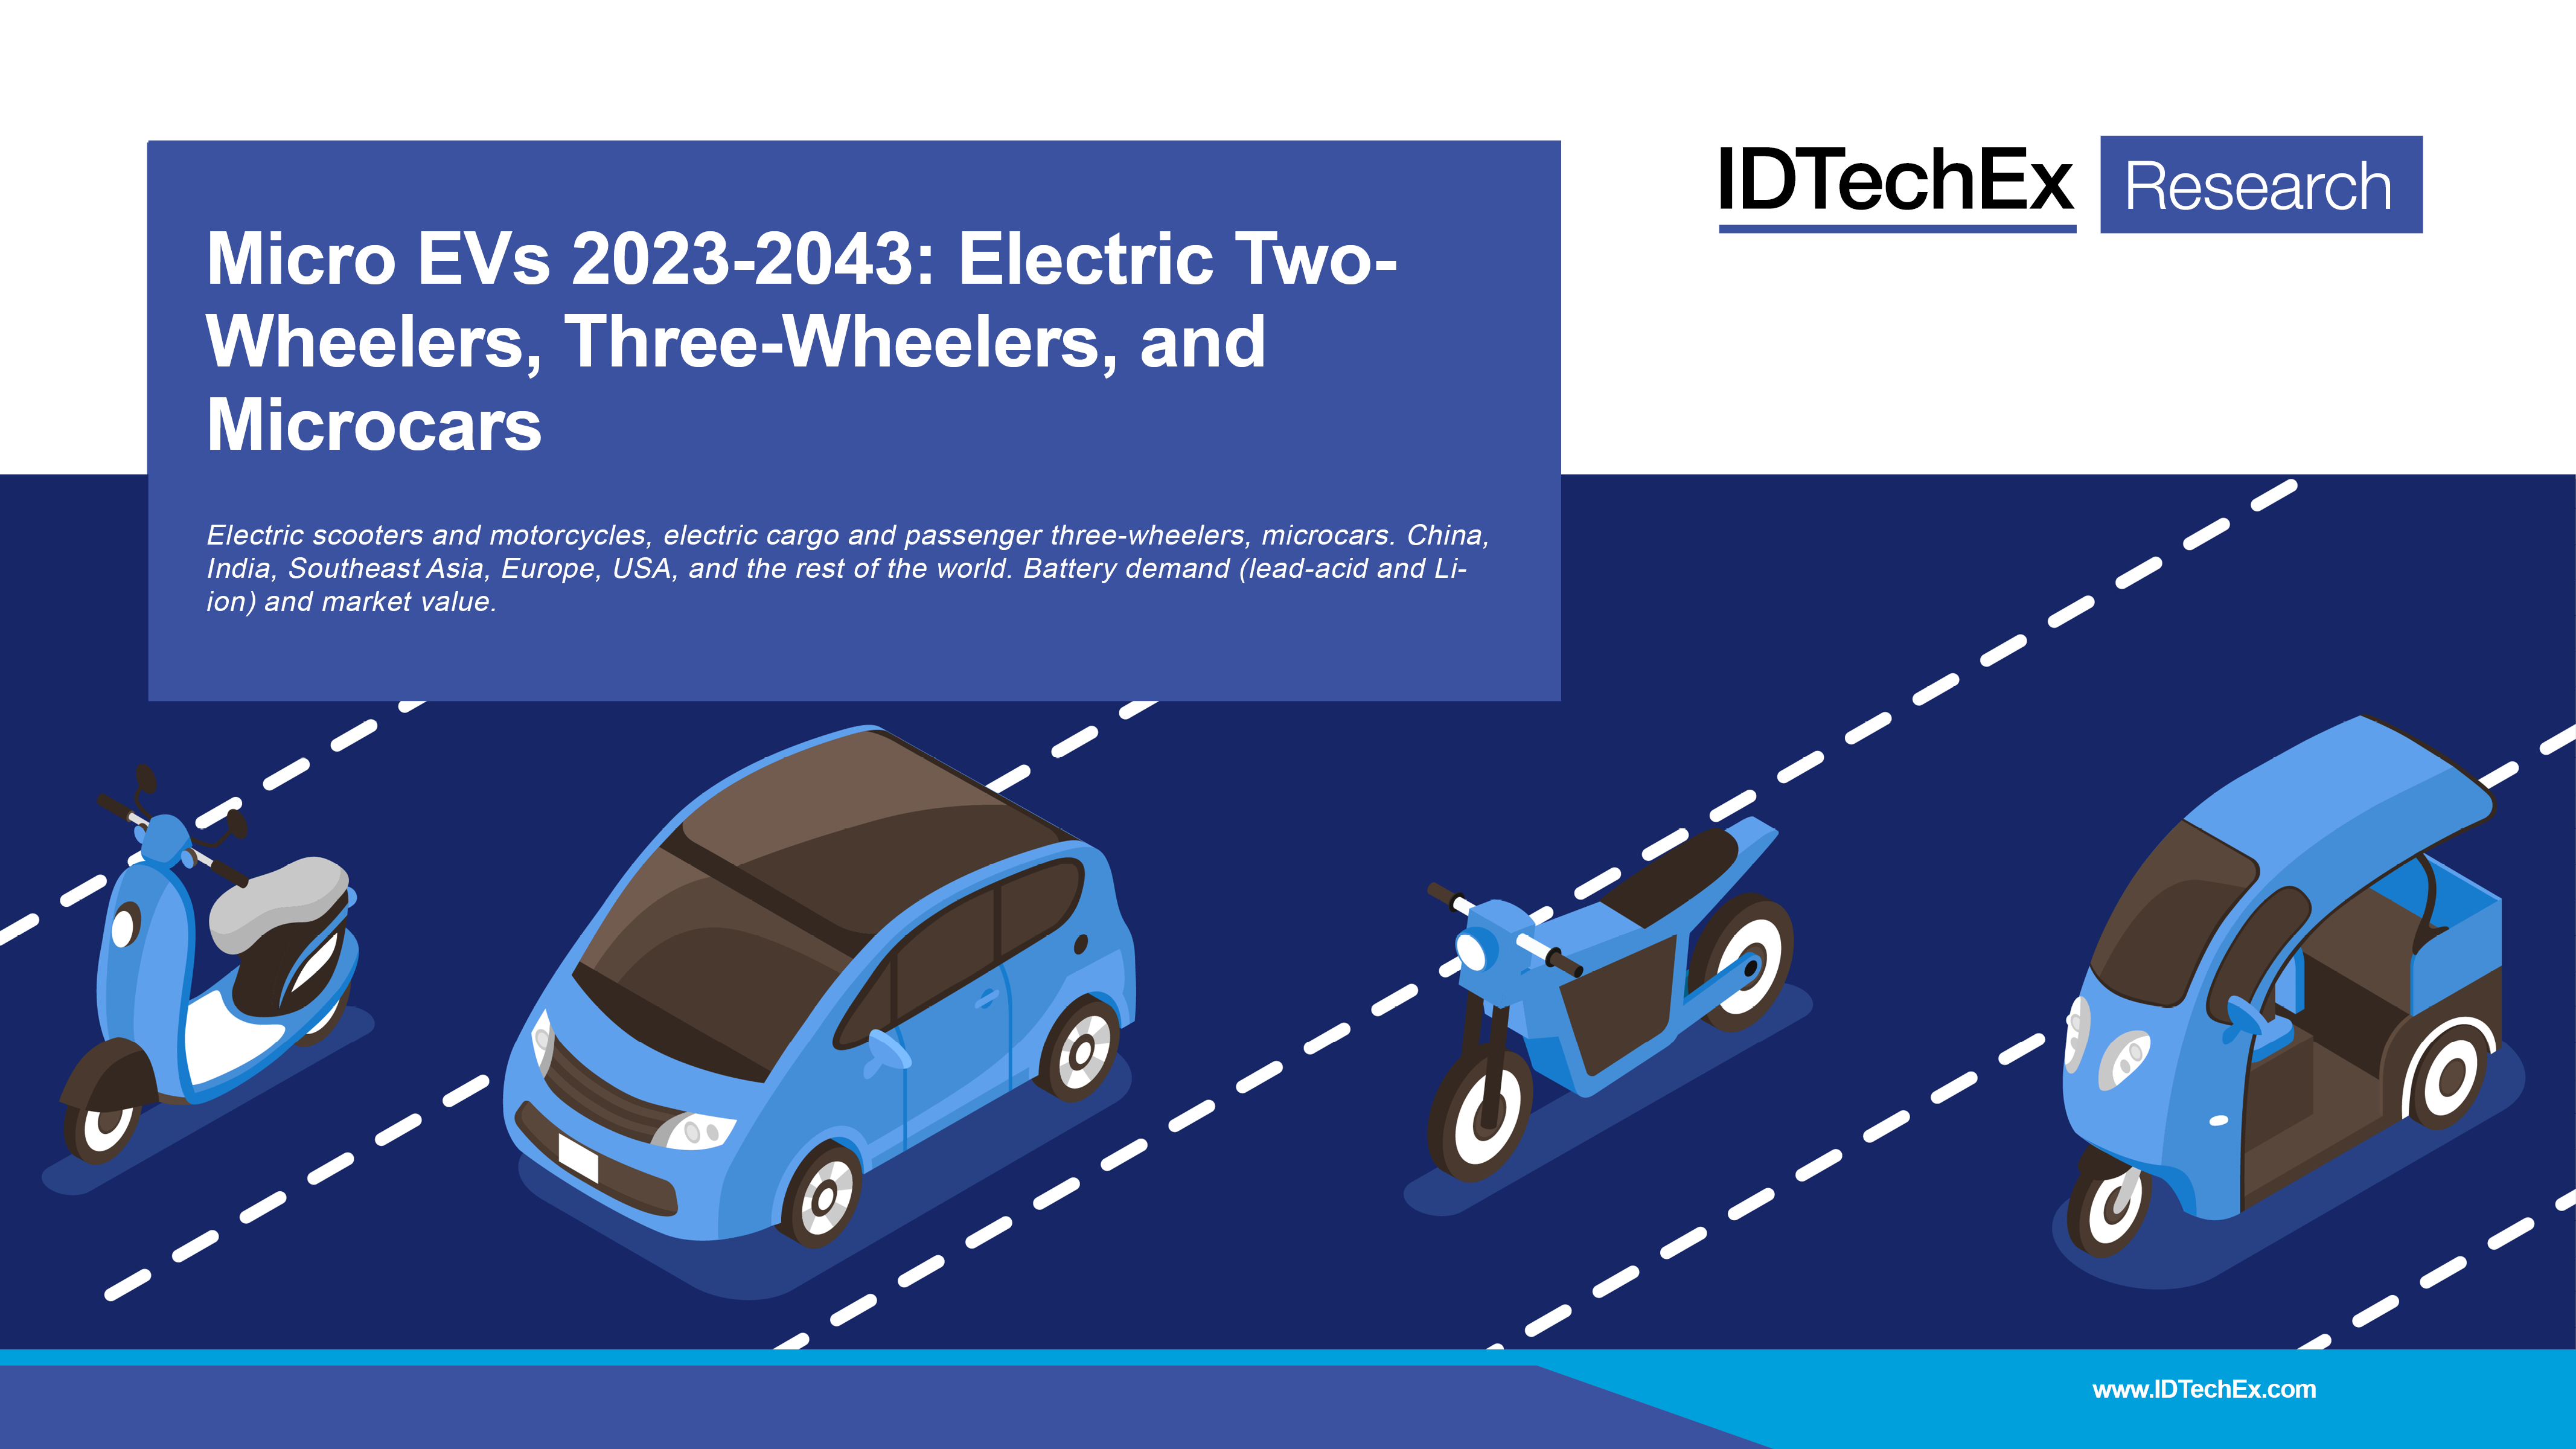 Electric Vehicles (EVs) - Emerging Technologies in Transportation